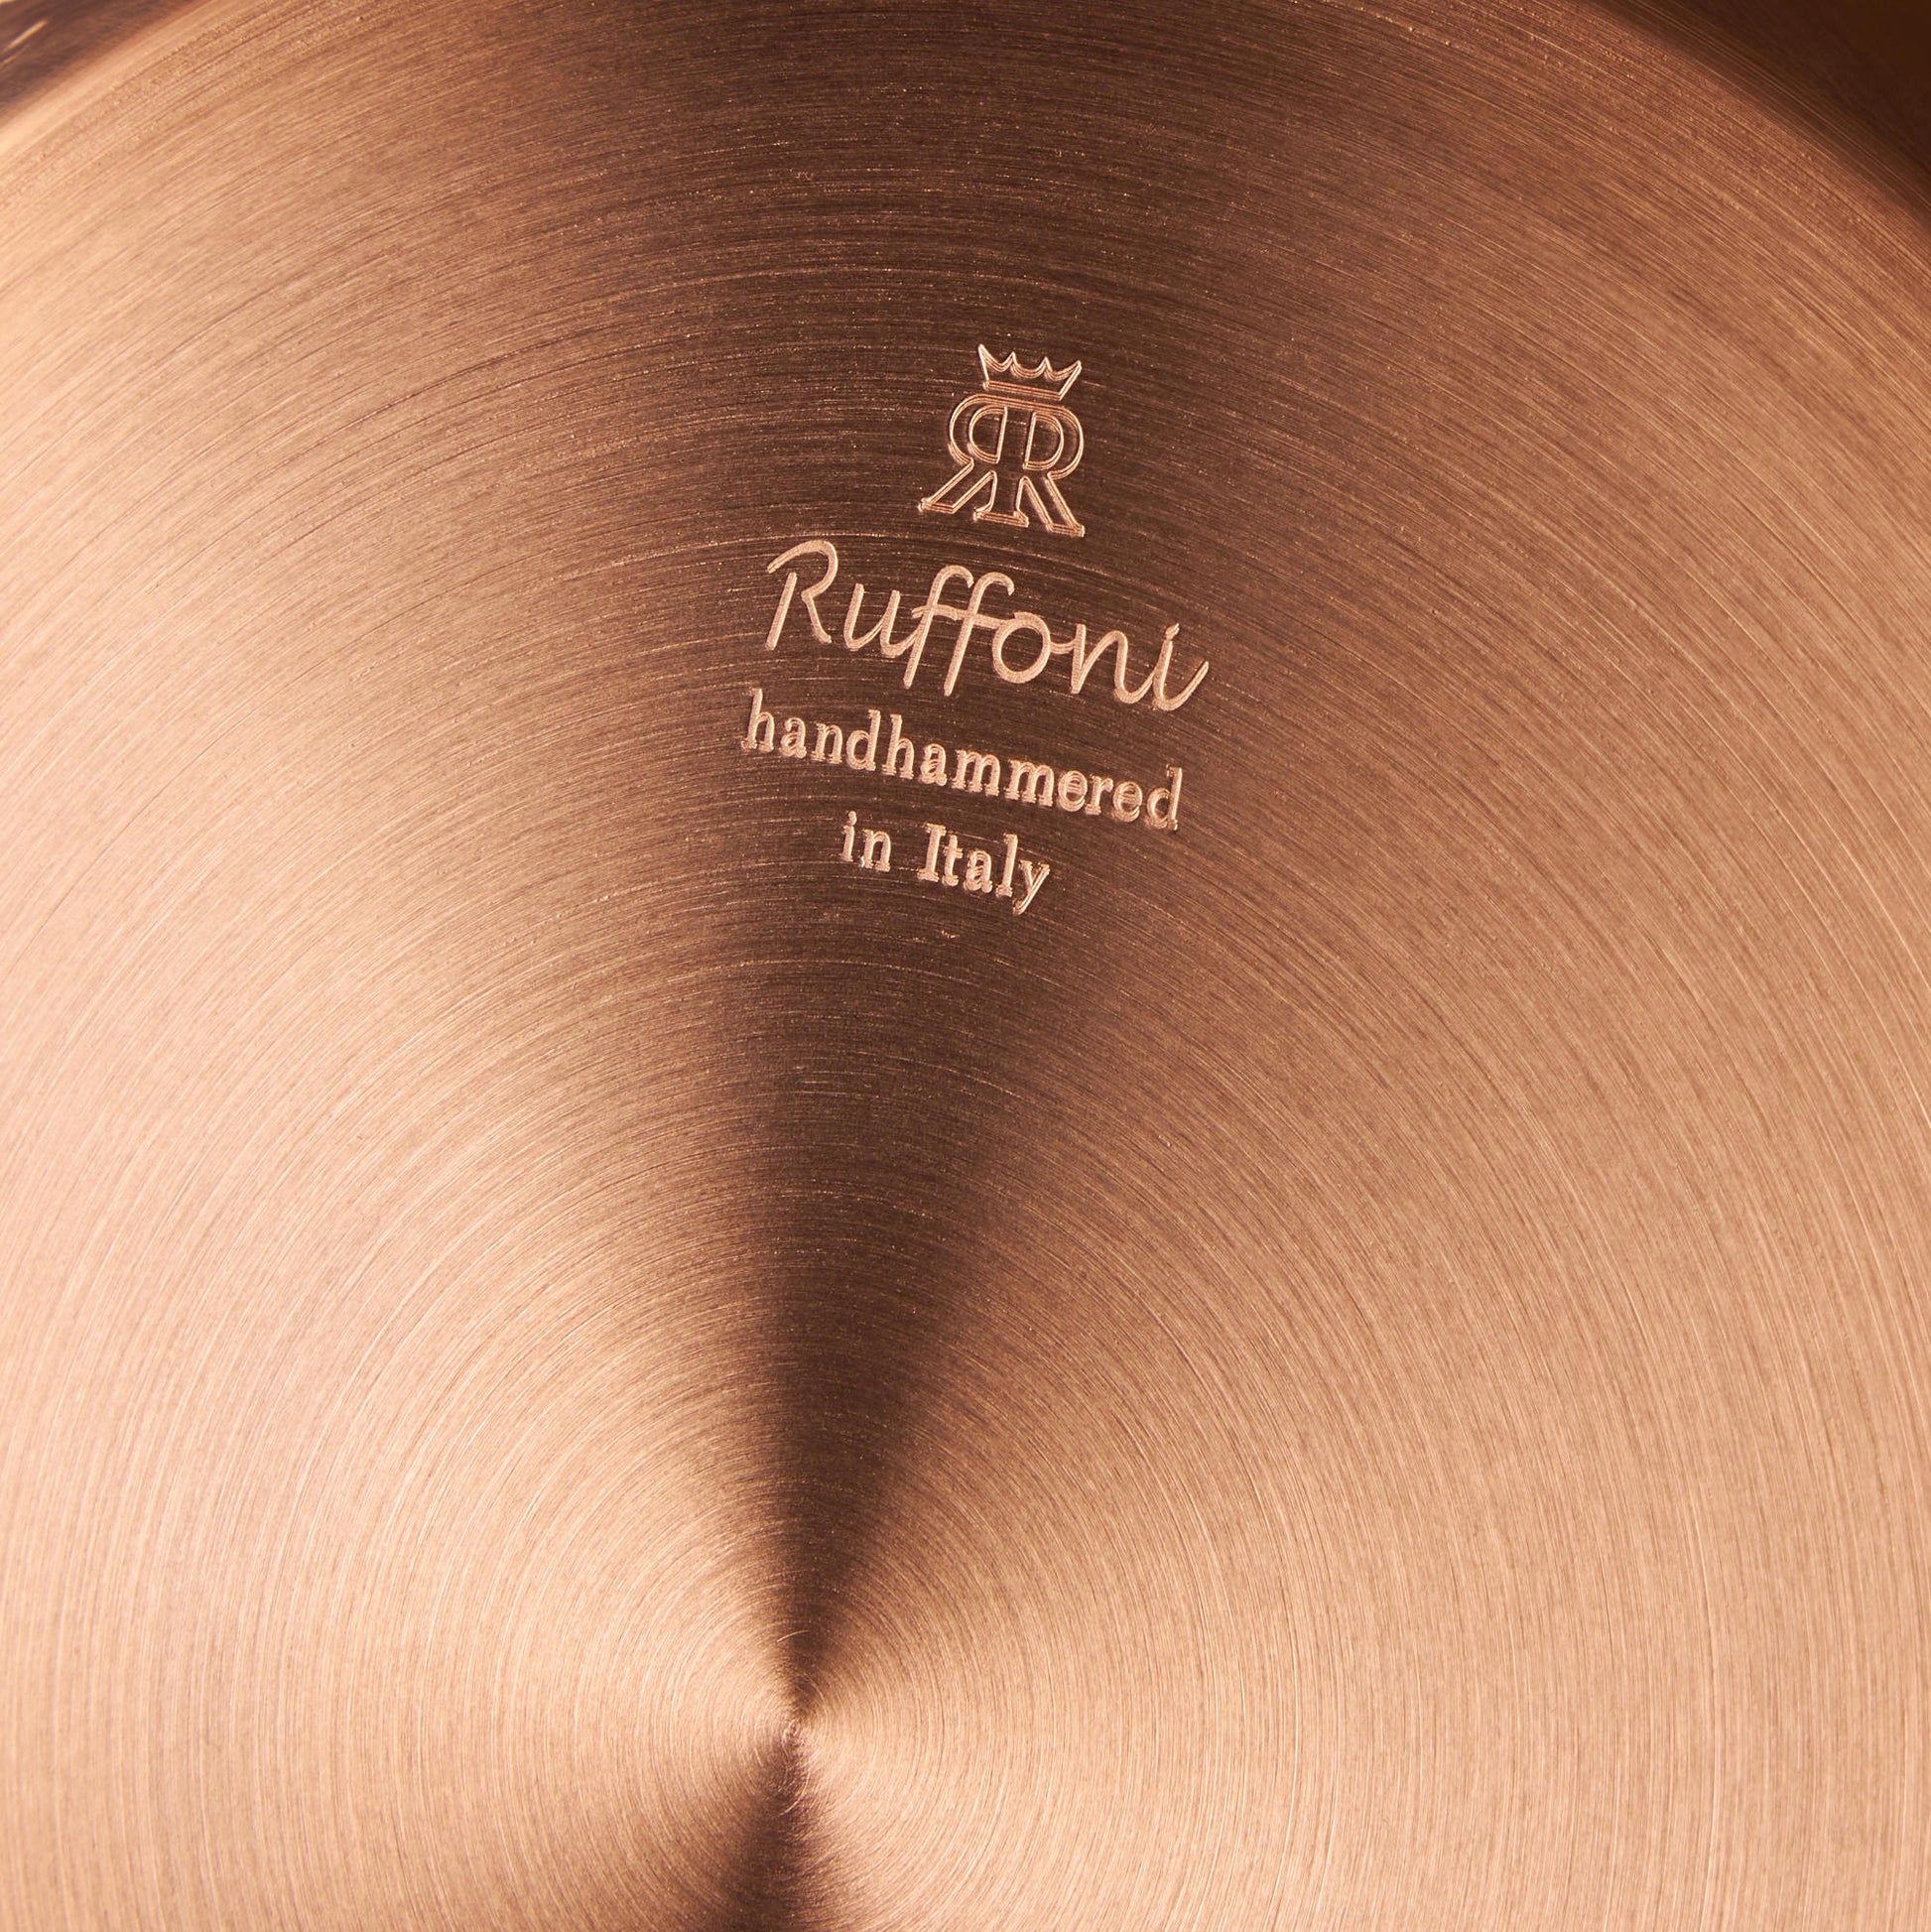 Ruffoni Made in Italy brand logo stamped under Opus Cupra copper braiser for authenticity